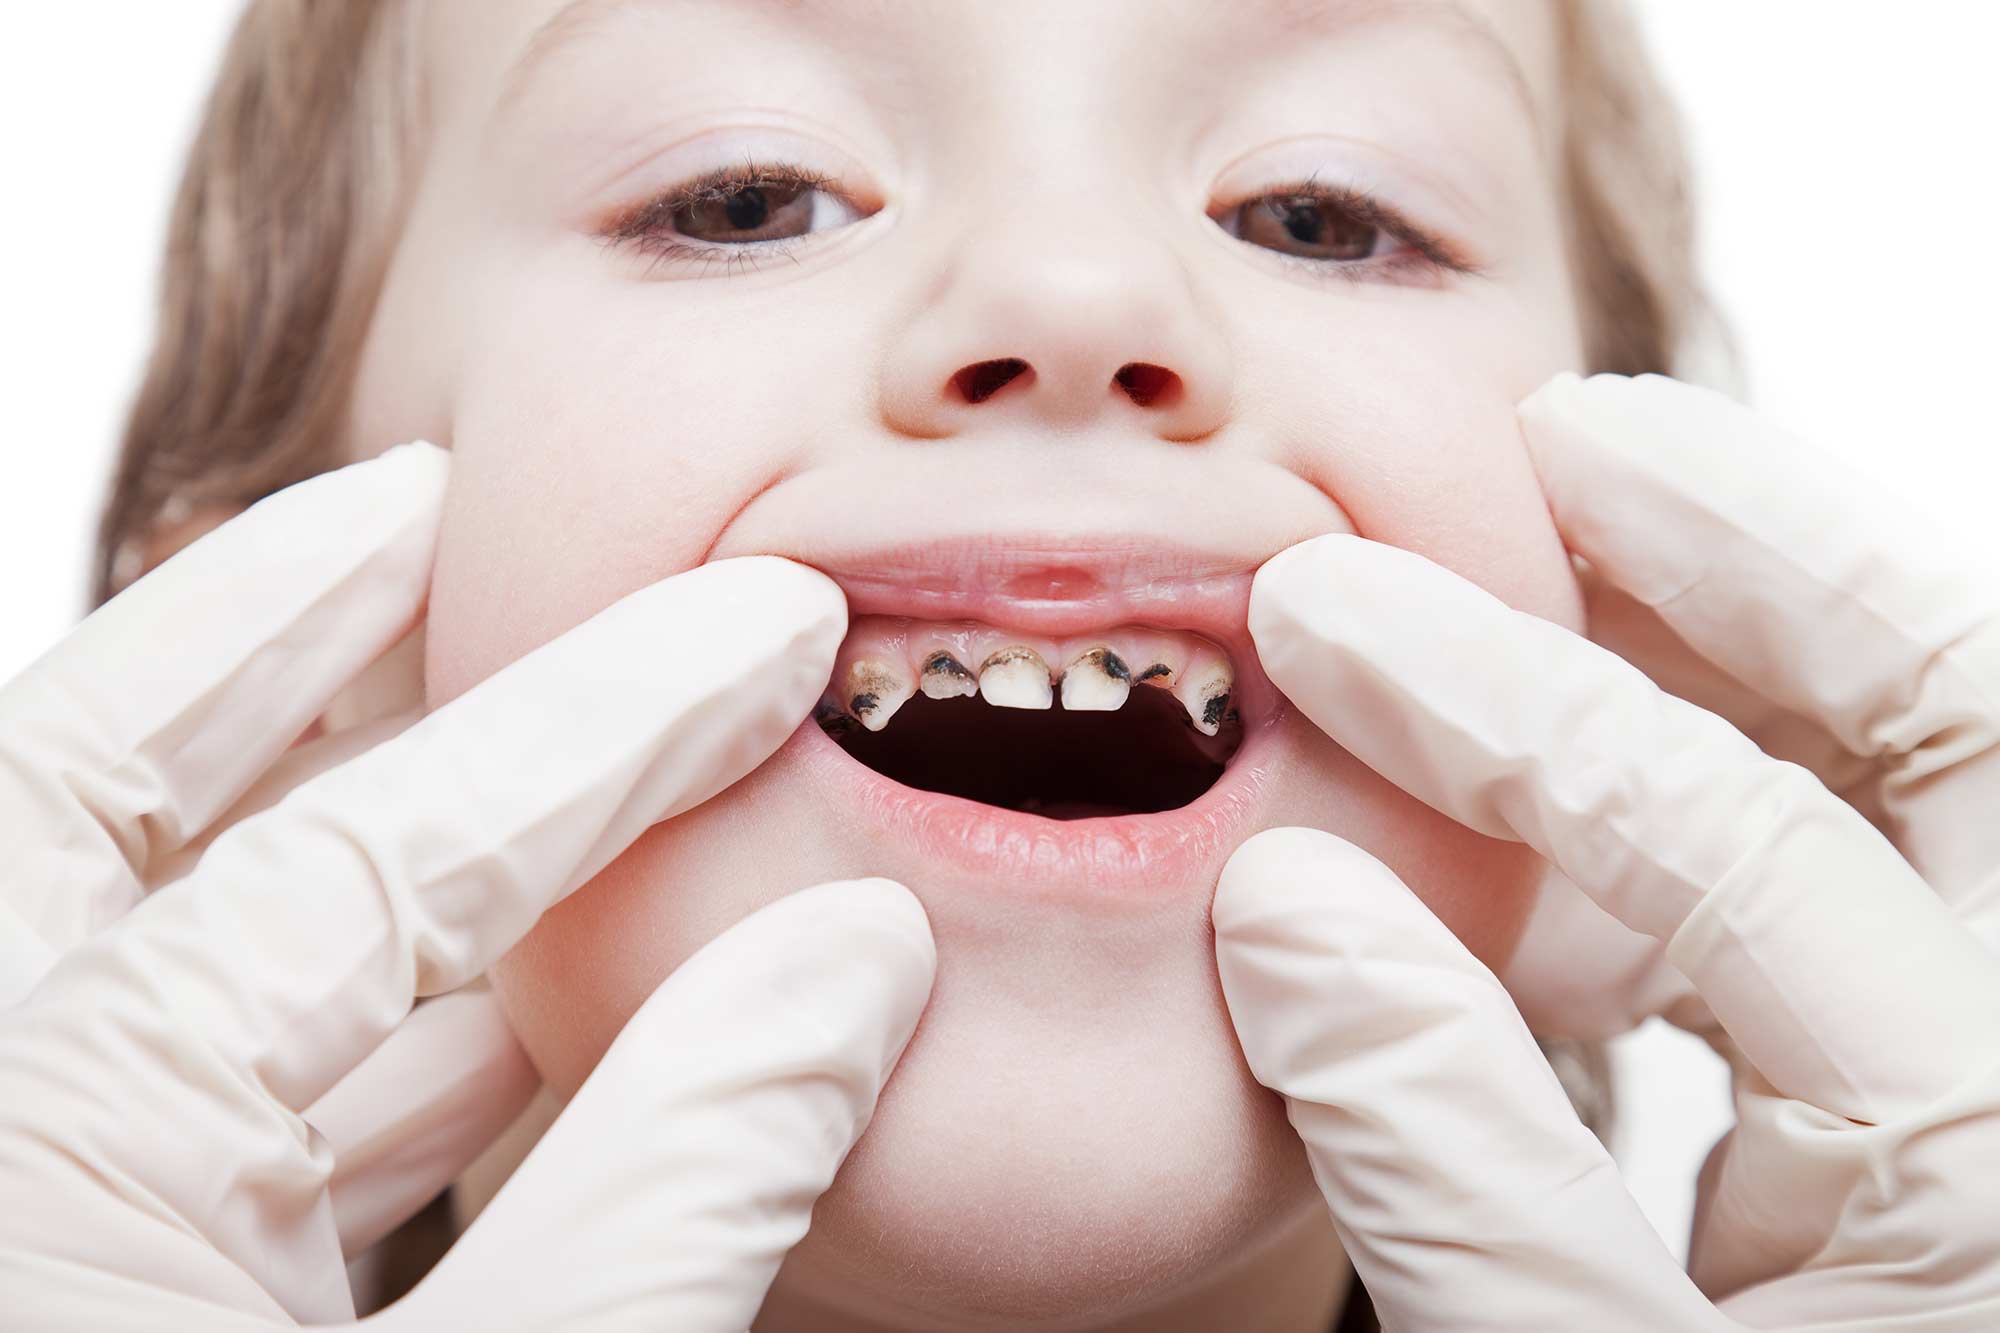 One in four five year olds experience tooth decay, according to new PHE data